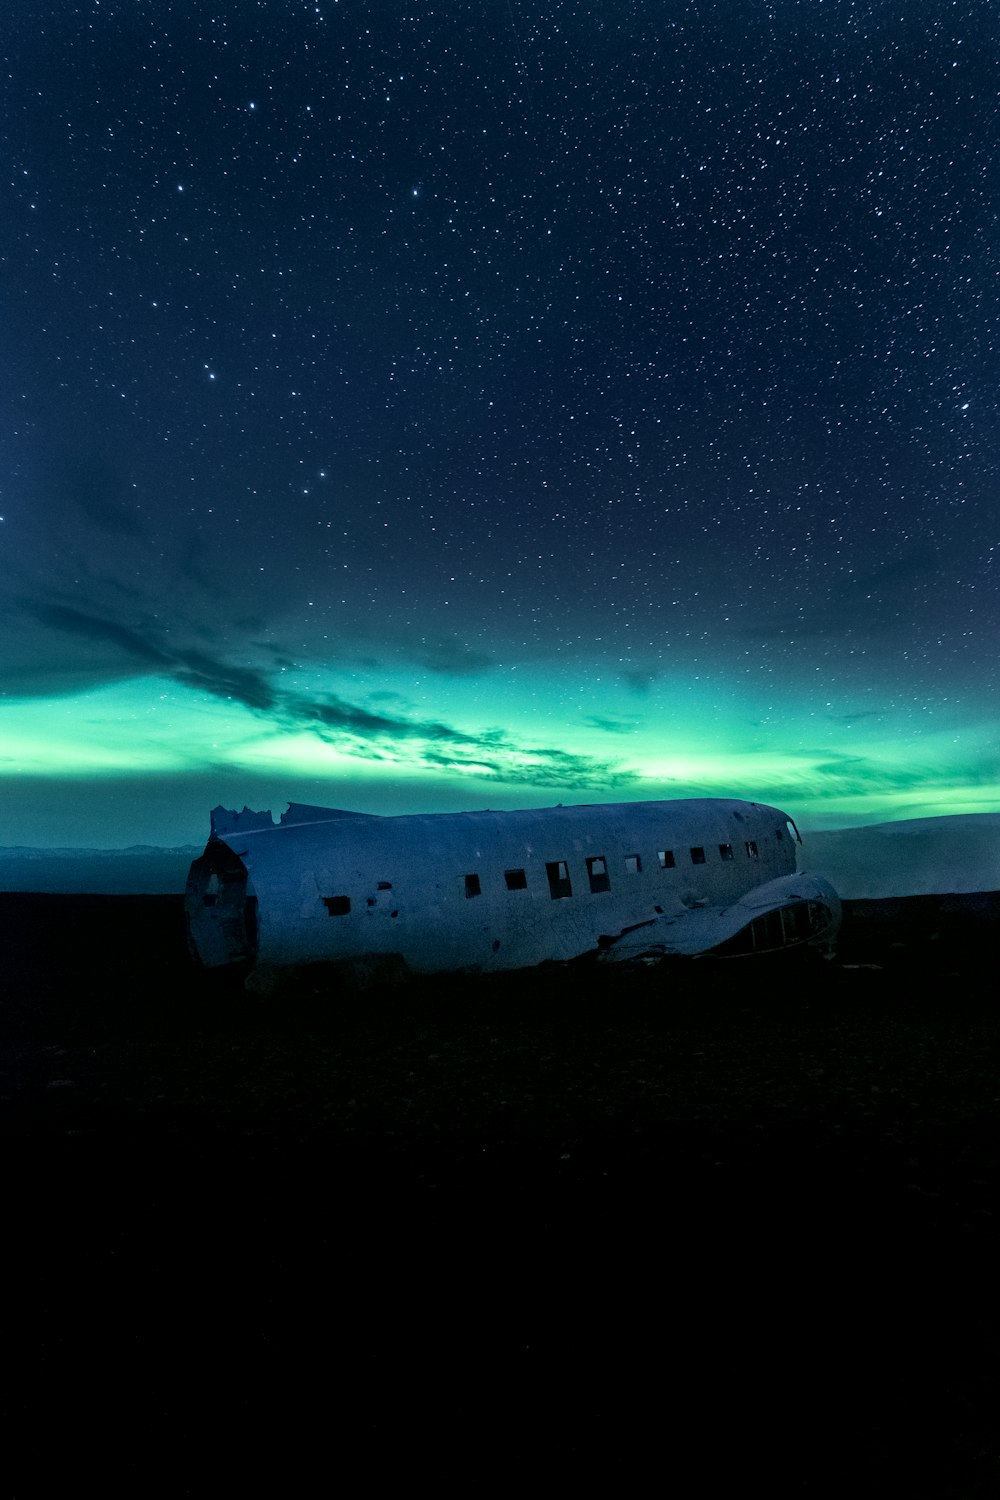 a plane sitting in the middle of a field under a night sky